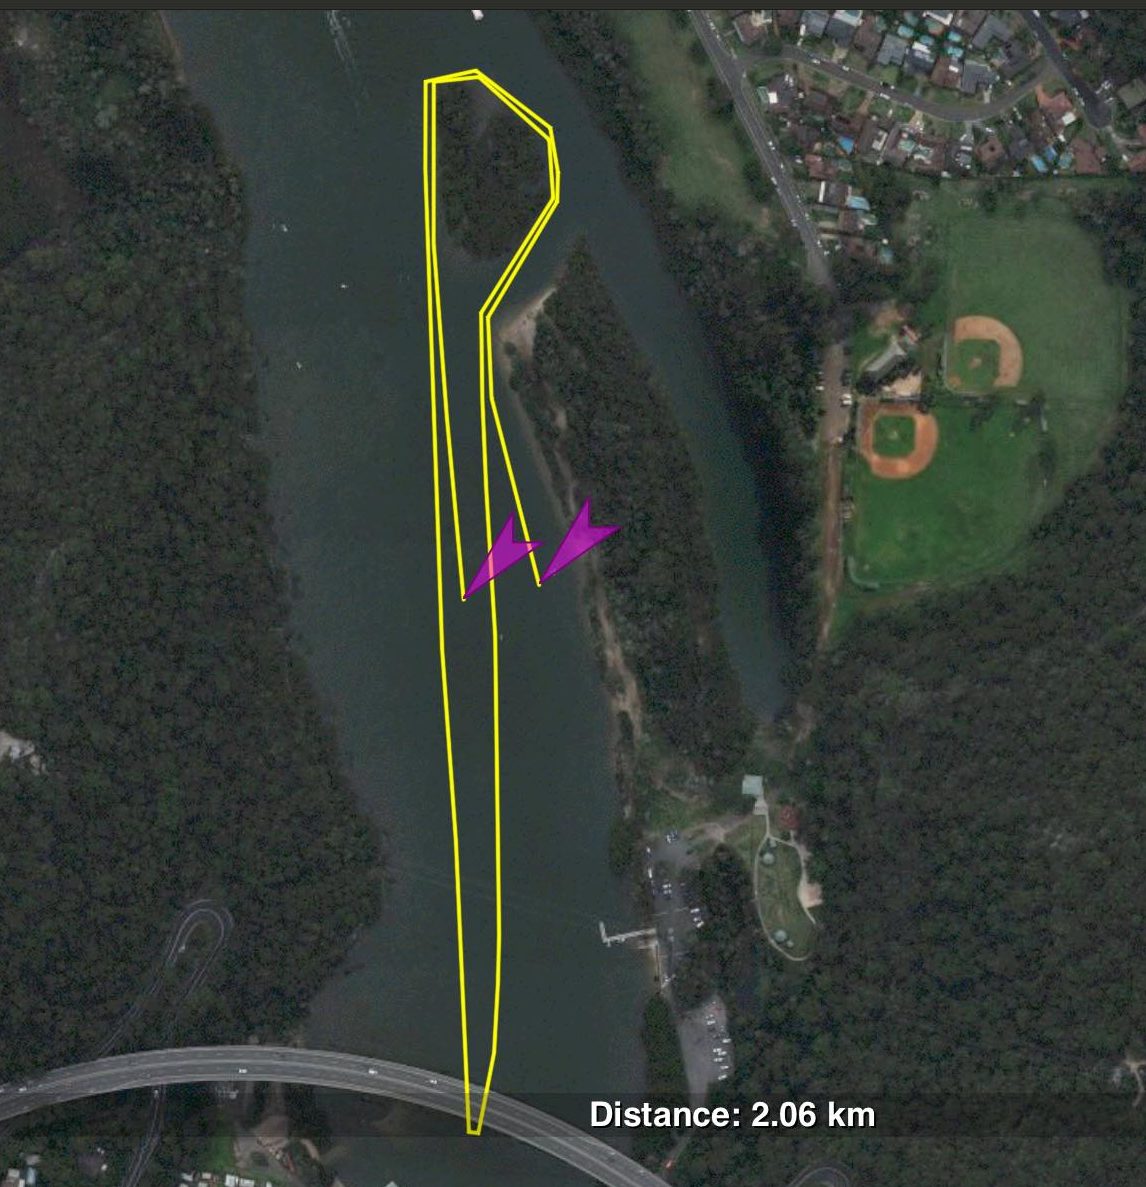 Satellite view of 2km time trial course with overlay showing route.